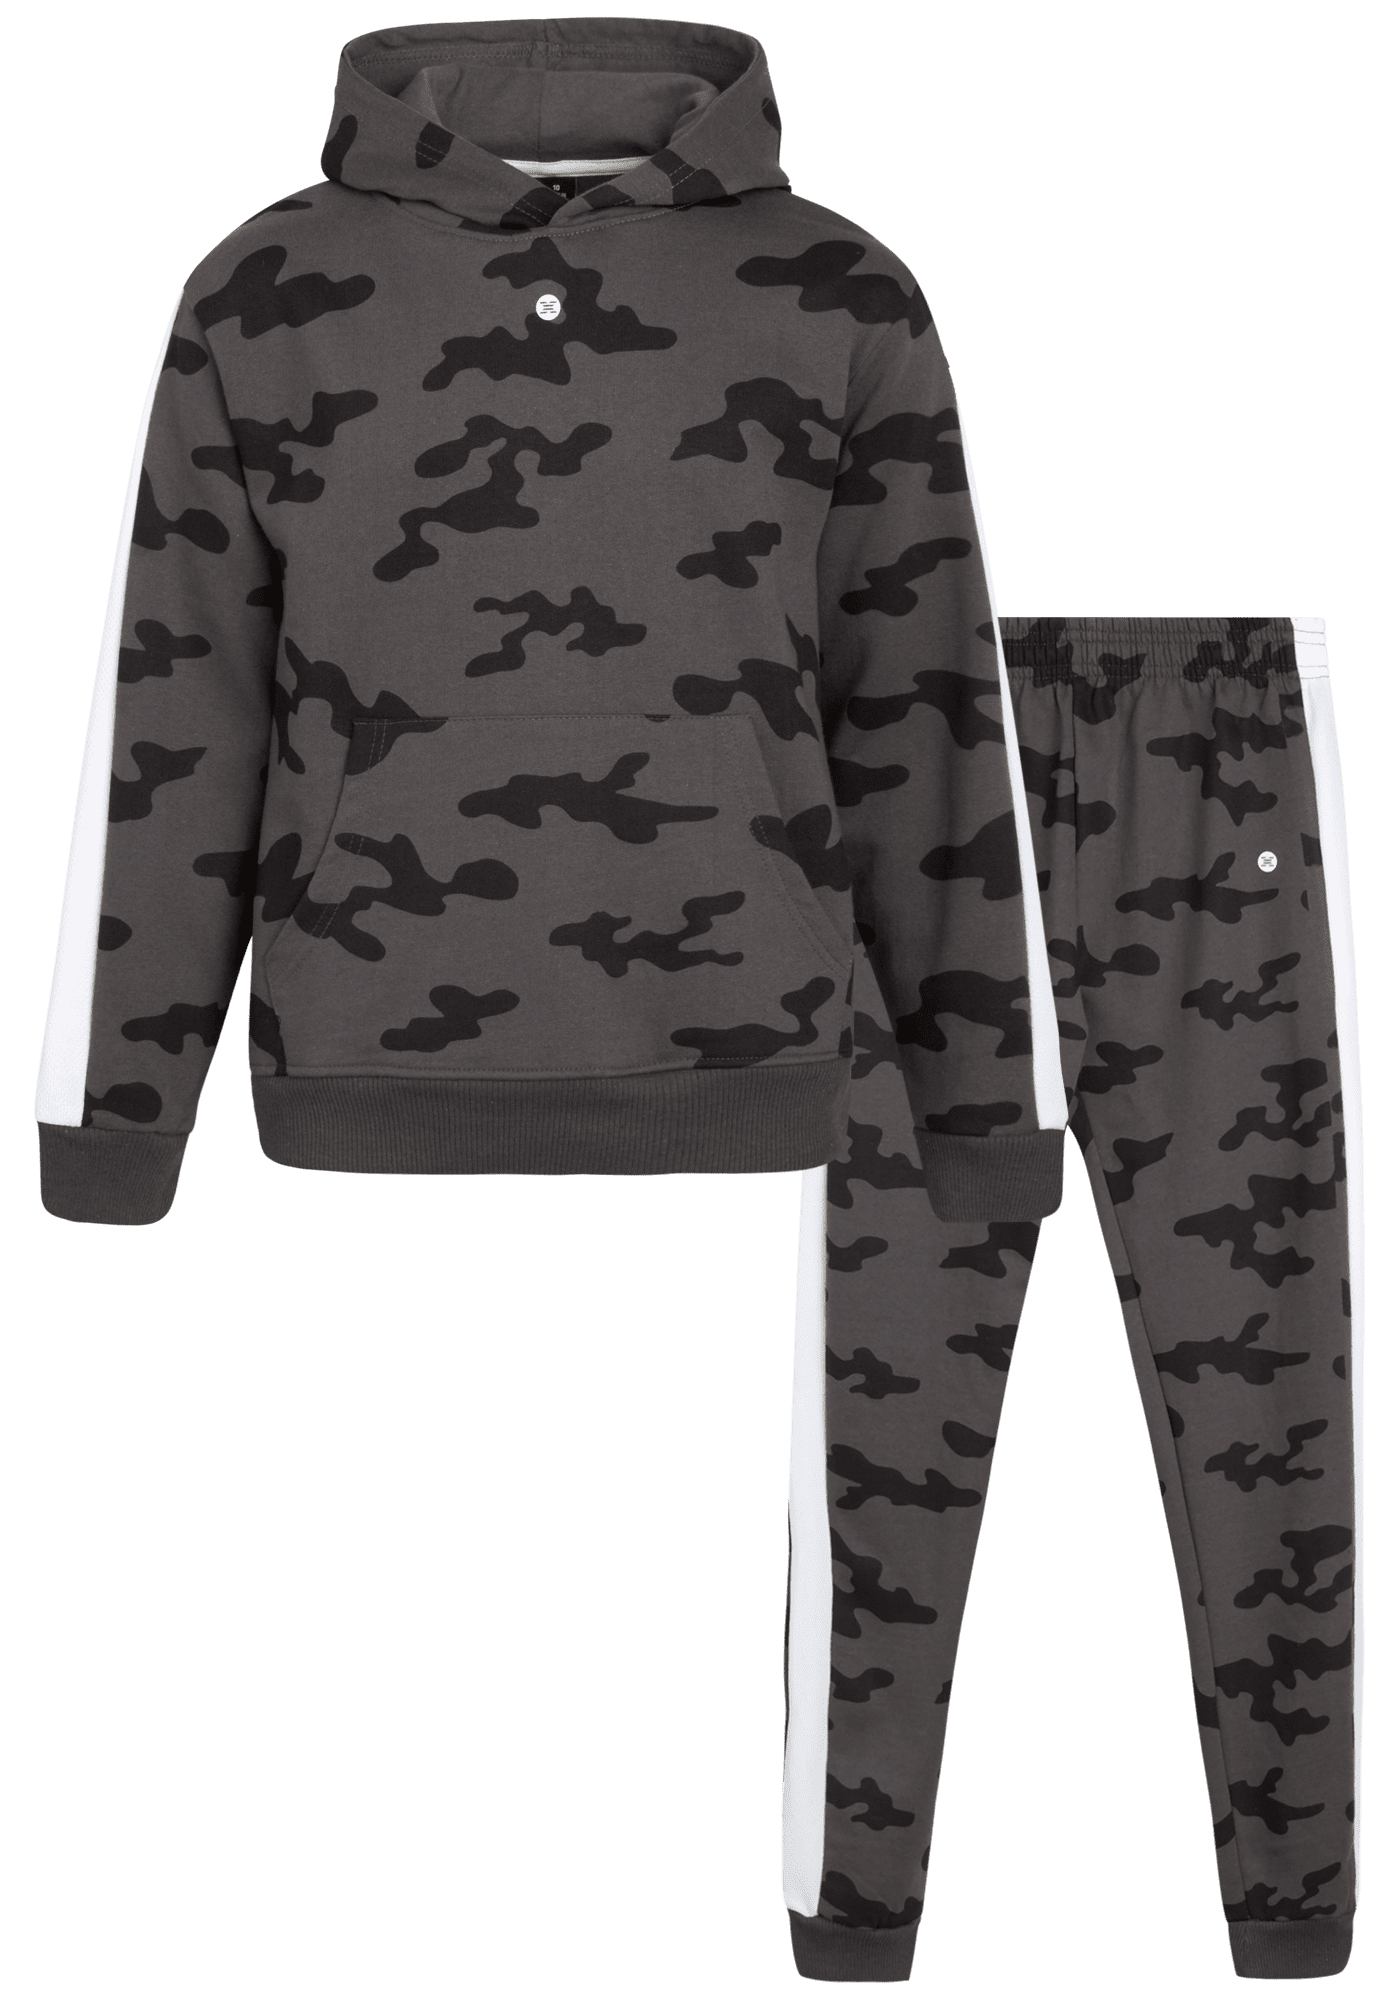 Athletic Works Girls Scuba Zip Hoodie and Joggers Set, Sizes 4-18